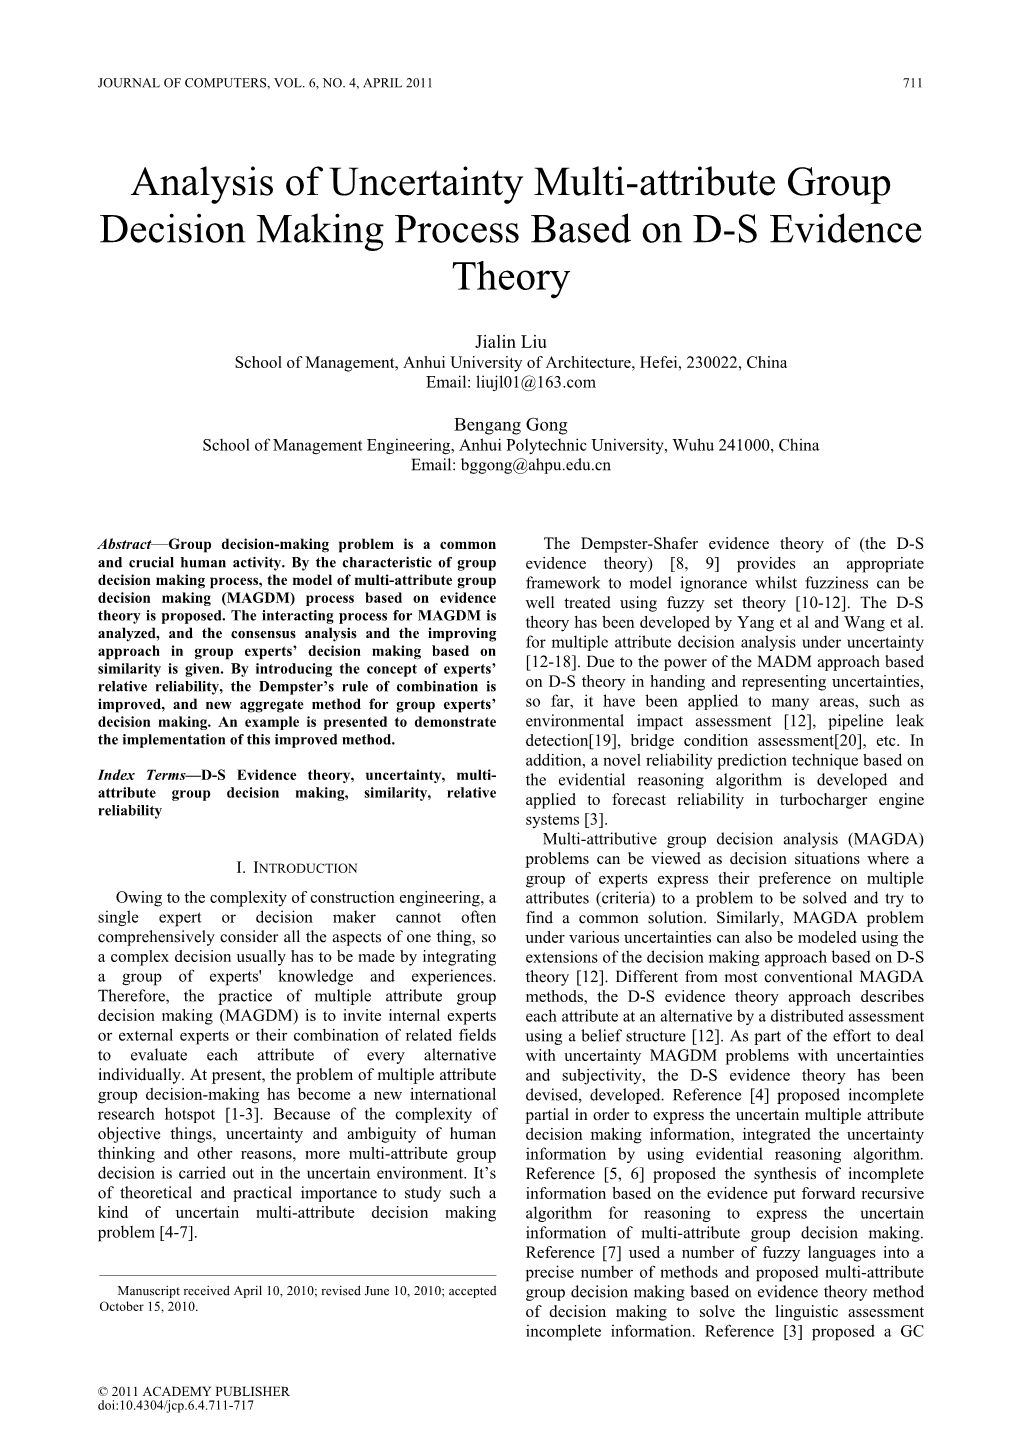 Analysis of Uncertainty Multi-Attribute Group Decision Making Process Based on D-S Evidence Theory